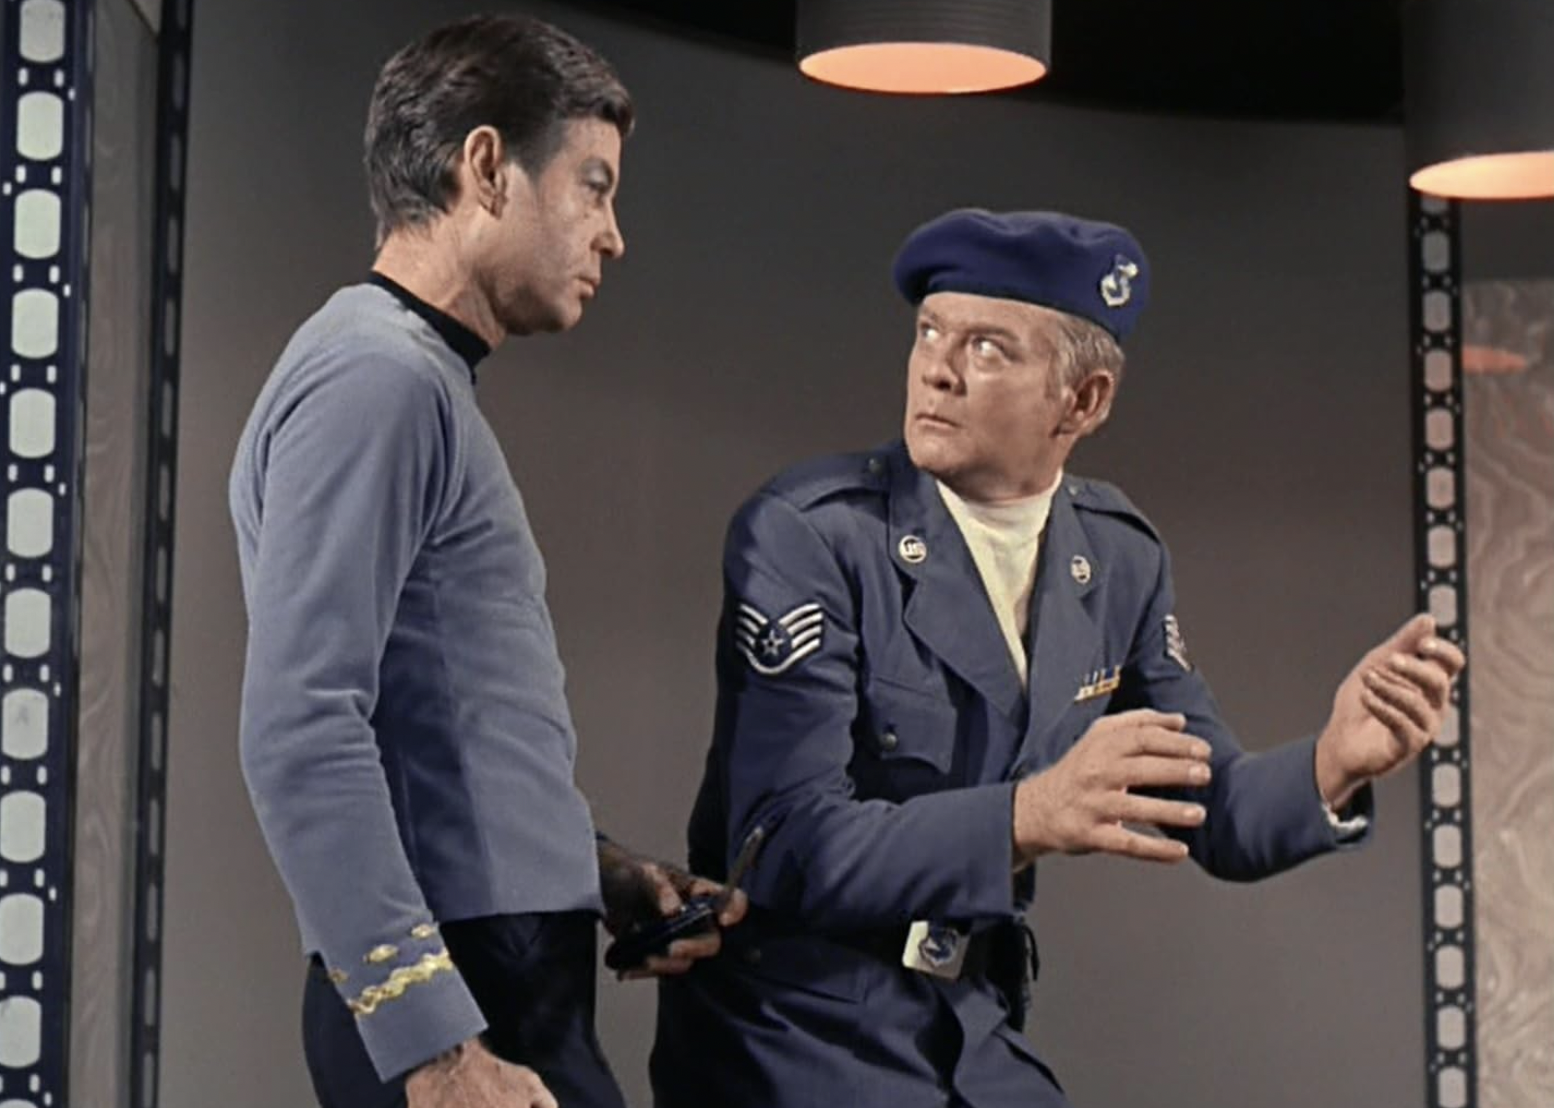 <p>- IMDb user rating: 7.9<br> - Season 1, Episode 19<br> - Director: Michael O'Herlihy</p>  <p>The 19th episode of "Star Trek" Season One is a time-travel story, with the Enterprise finding itself above 1960s Earth. A U.S. Air Force pilot named John Christopher flies up to identify the ship, only to be beamed up by the crew. What ensues is a race to scrub all evidence of the Enterprise's visit to the 1960s while containing Christopher, all while trying to return home. In terms of "Star Trek" lore, the Enterprise's method of returning to the future is used again in "Star Trek IV: The Voyage Home" and <a href="https://screenrant.com/star-trek-picard-spock-enterprise-time-travel-important/">referenced in "Star Trek: Picard."</a></p>